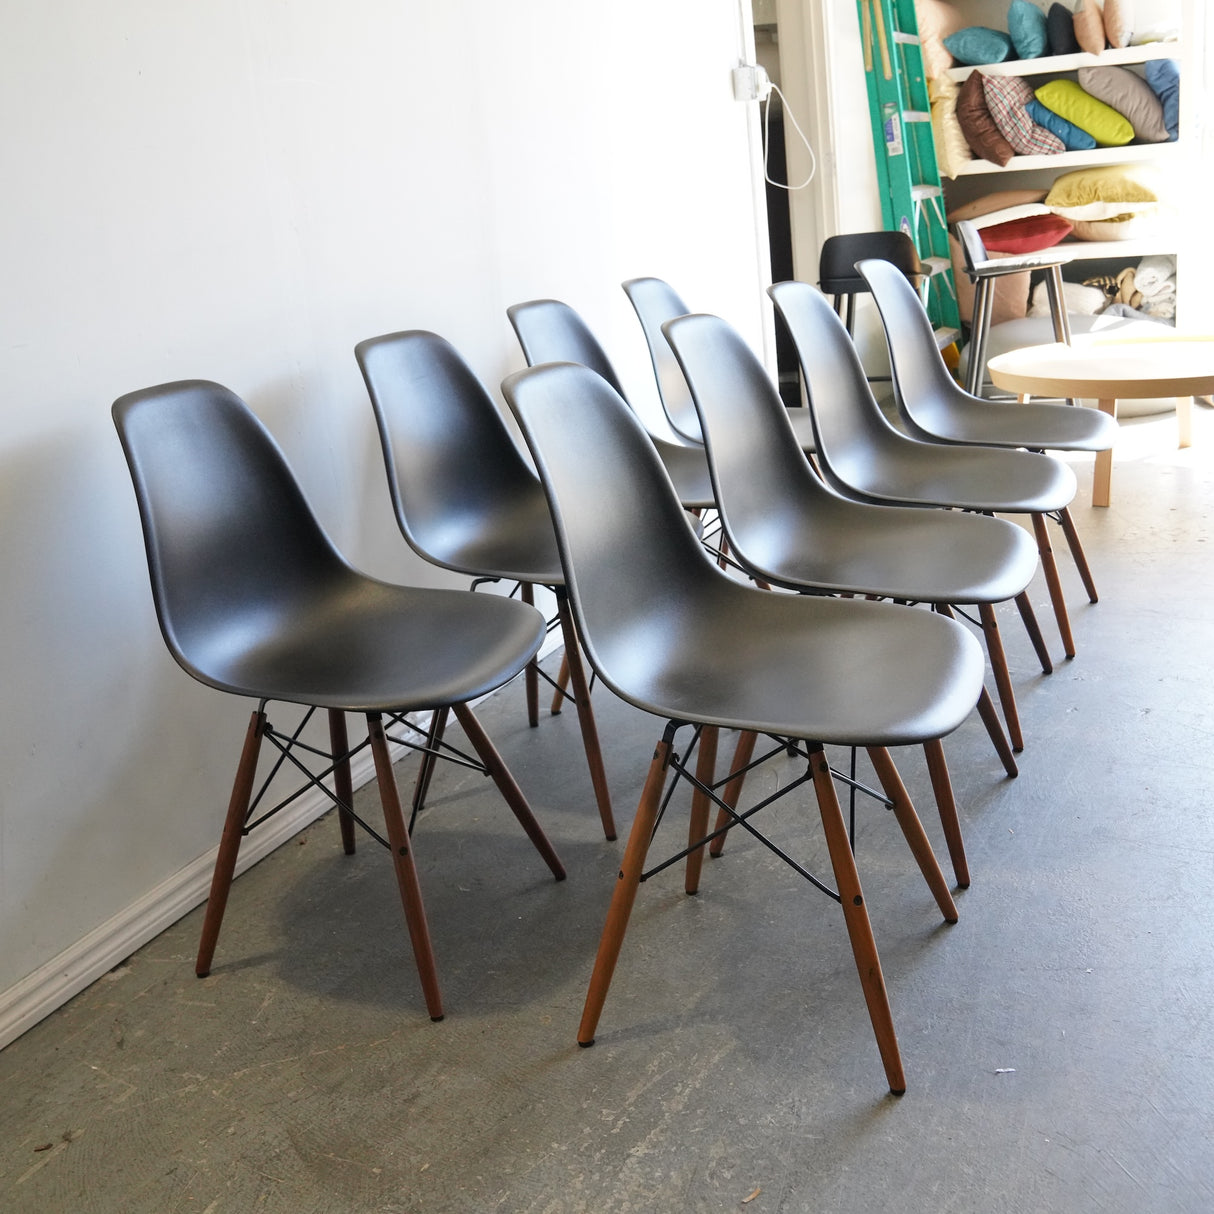 Authentic Herman Miller set of 8 Eames plastic molded chairs